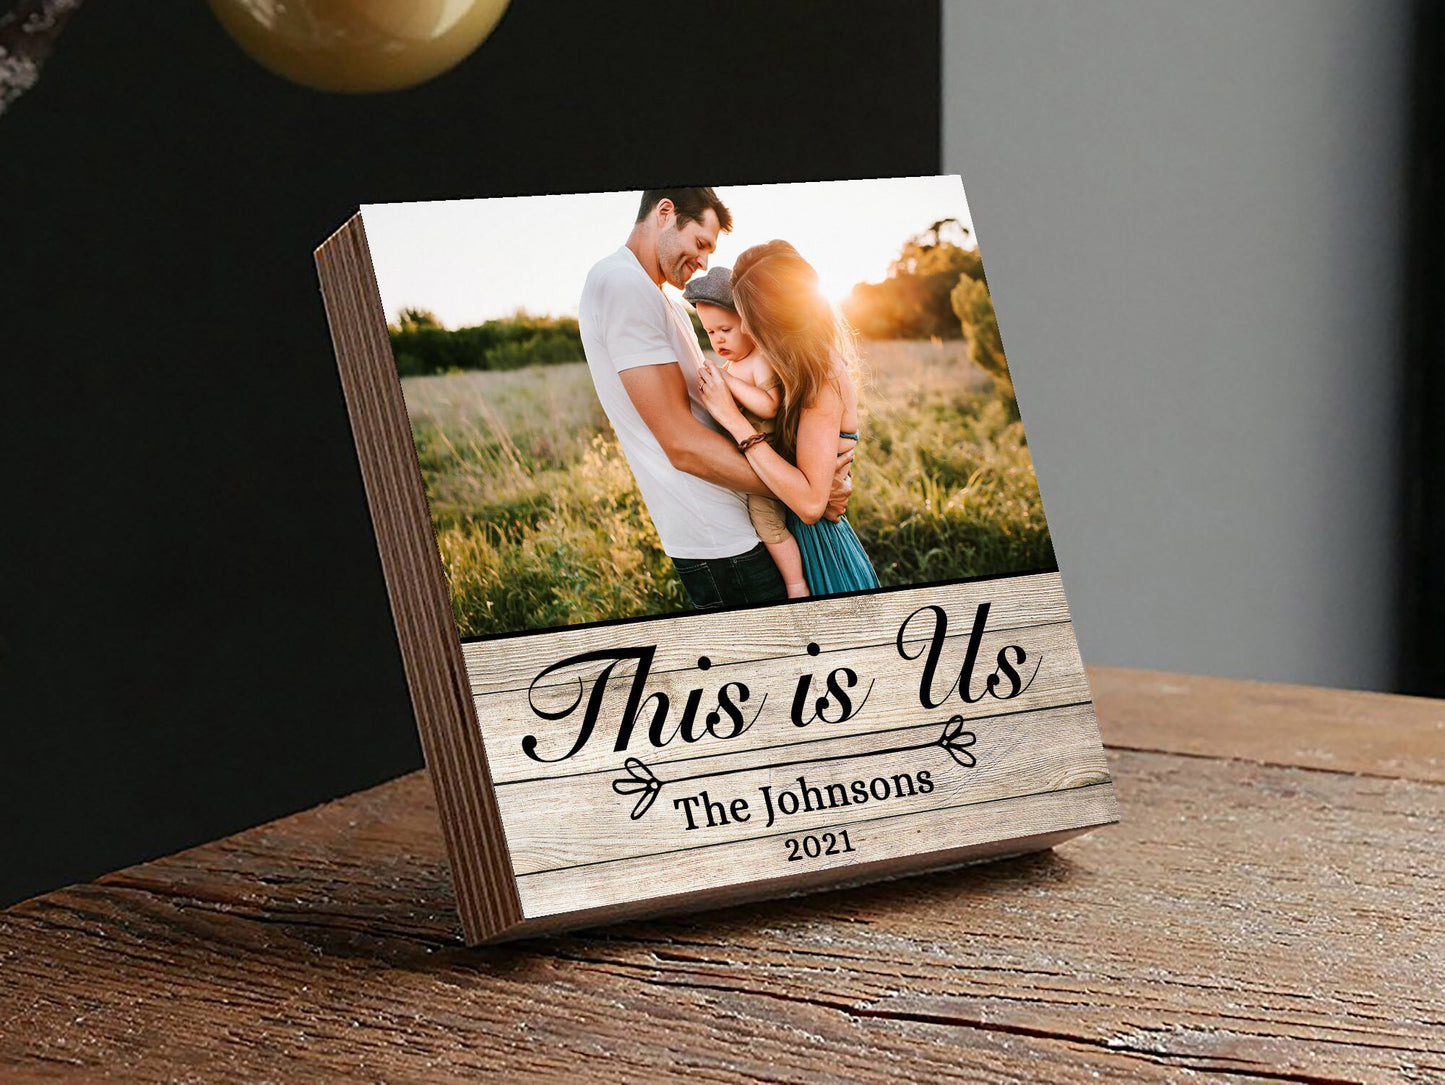 Personalized Family Sign "This is us" - Photo Block 4" or 6" - This is Us Wall Art - Family Name Sign - Last Name sign - Family Wall Art